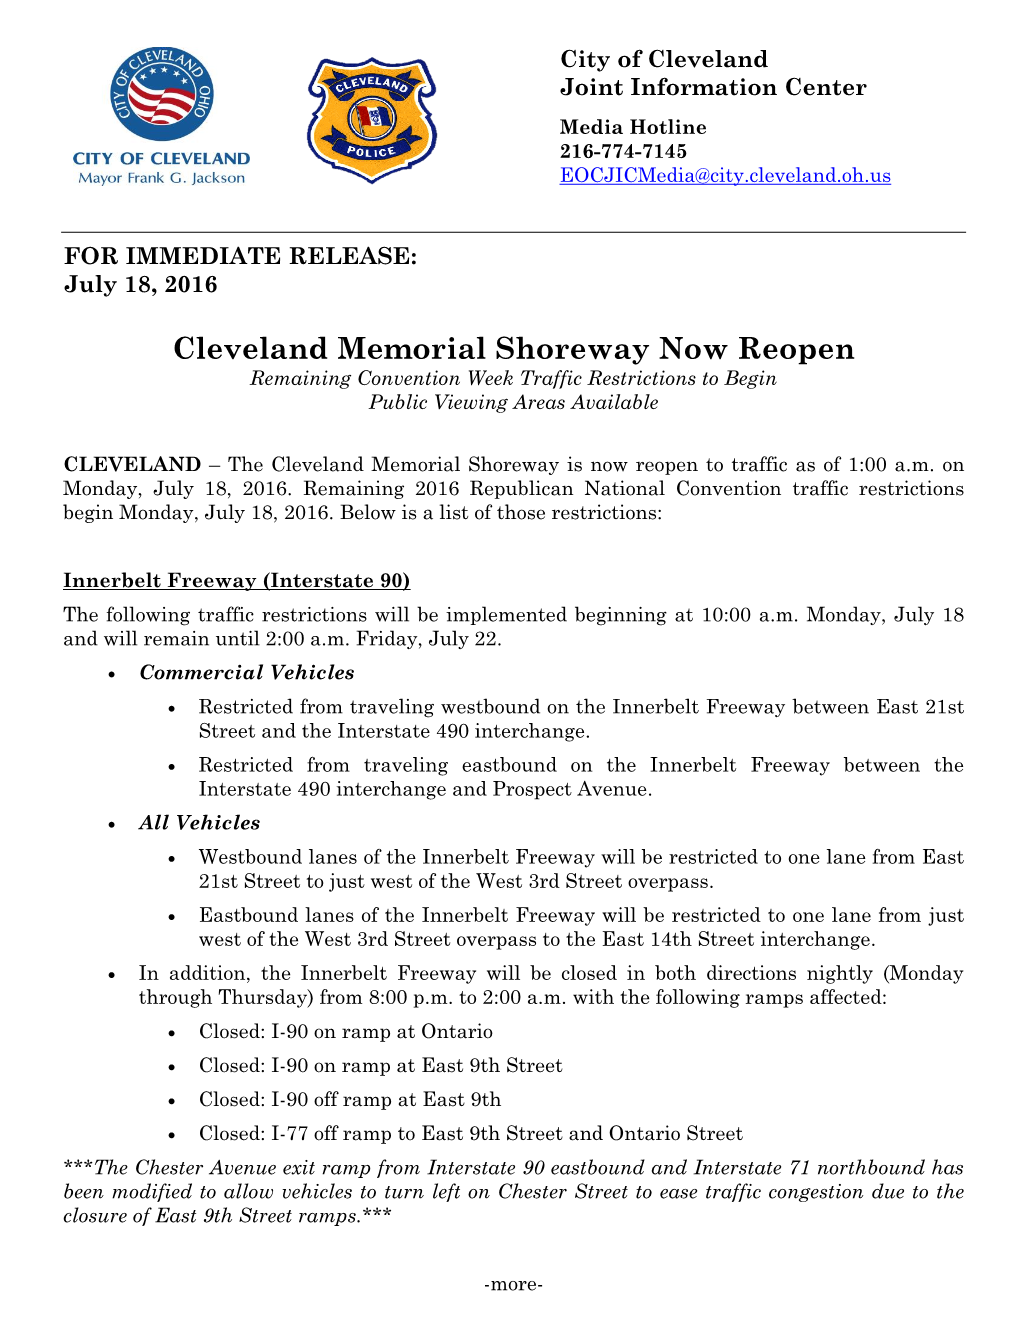 Cleveland Memorial Shoreway Now Reopen Remaining Convention Week Traffic Restrictions to Begin Public Viewing Areas Available